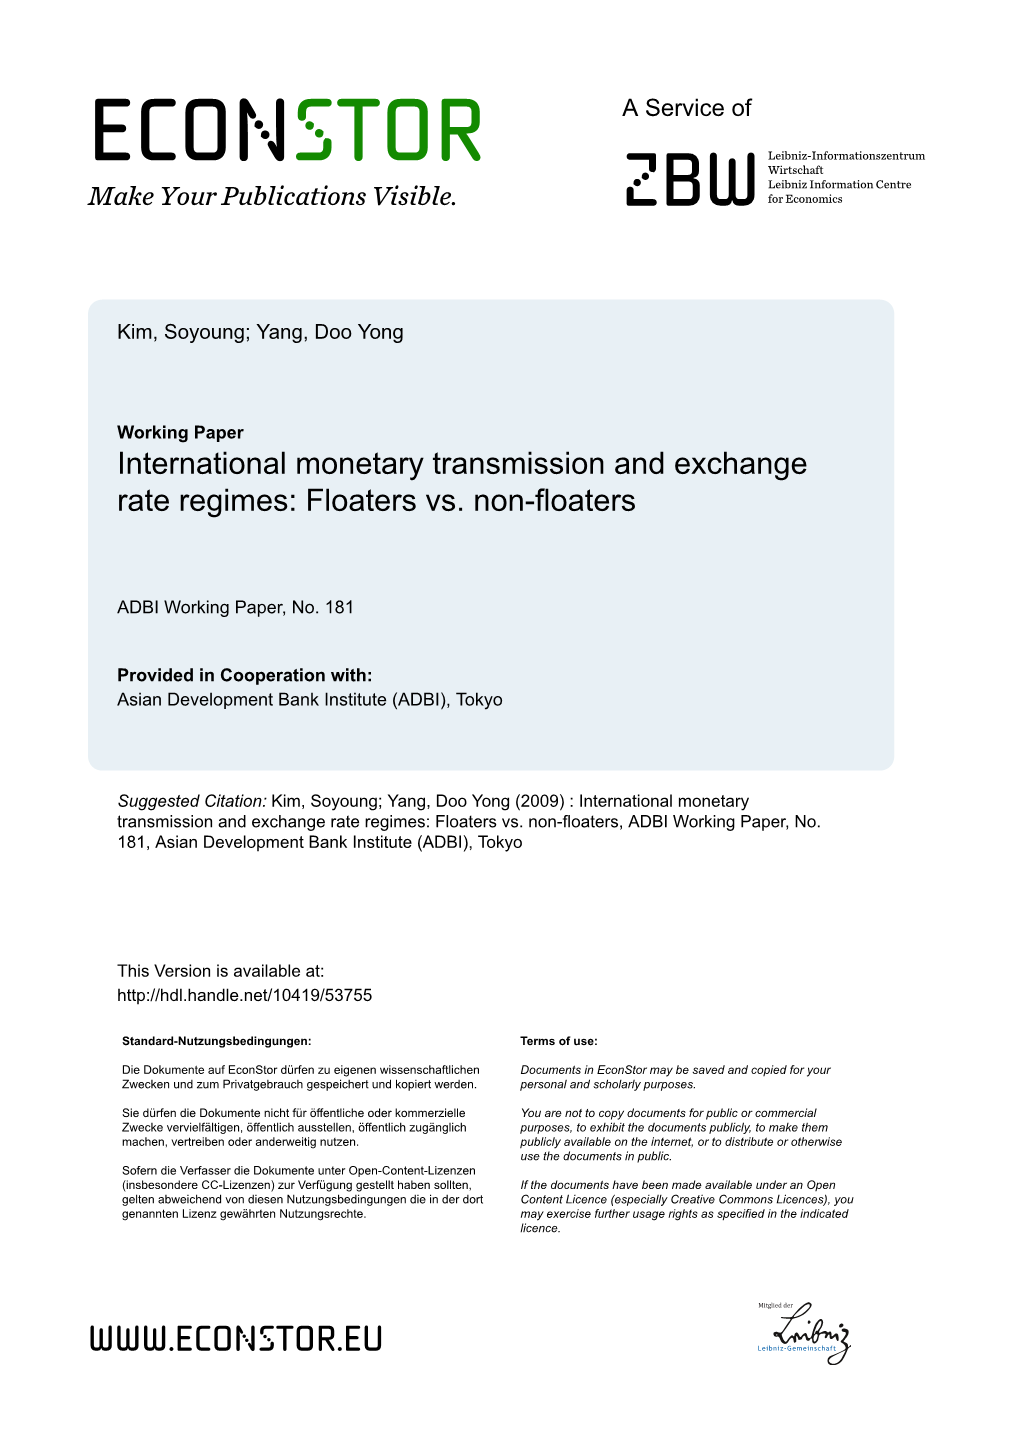 International Monetary Transmission and Exchange Rate Regimes: Floaters Vs